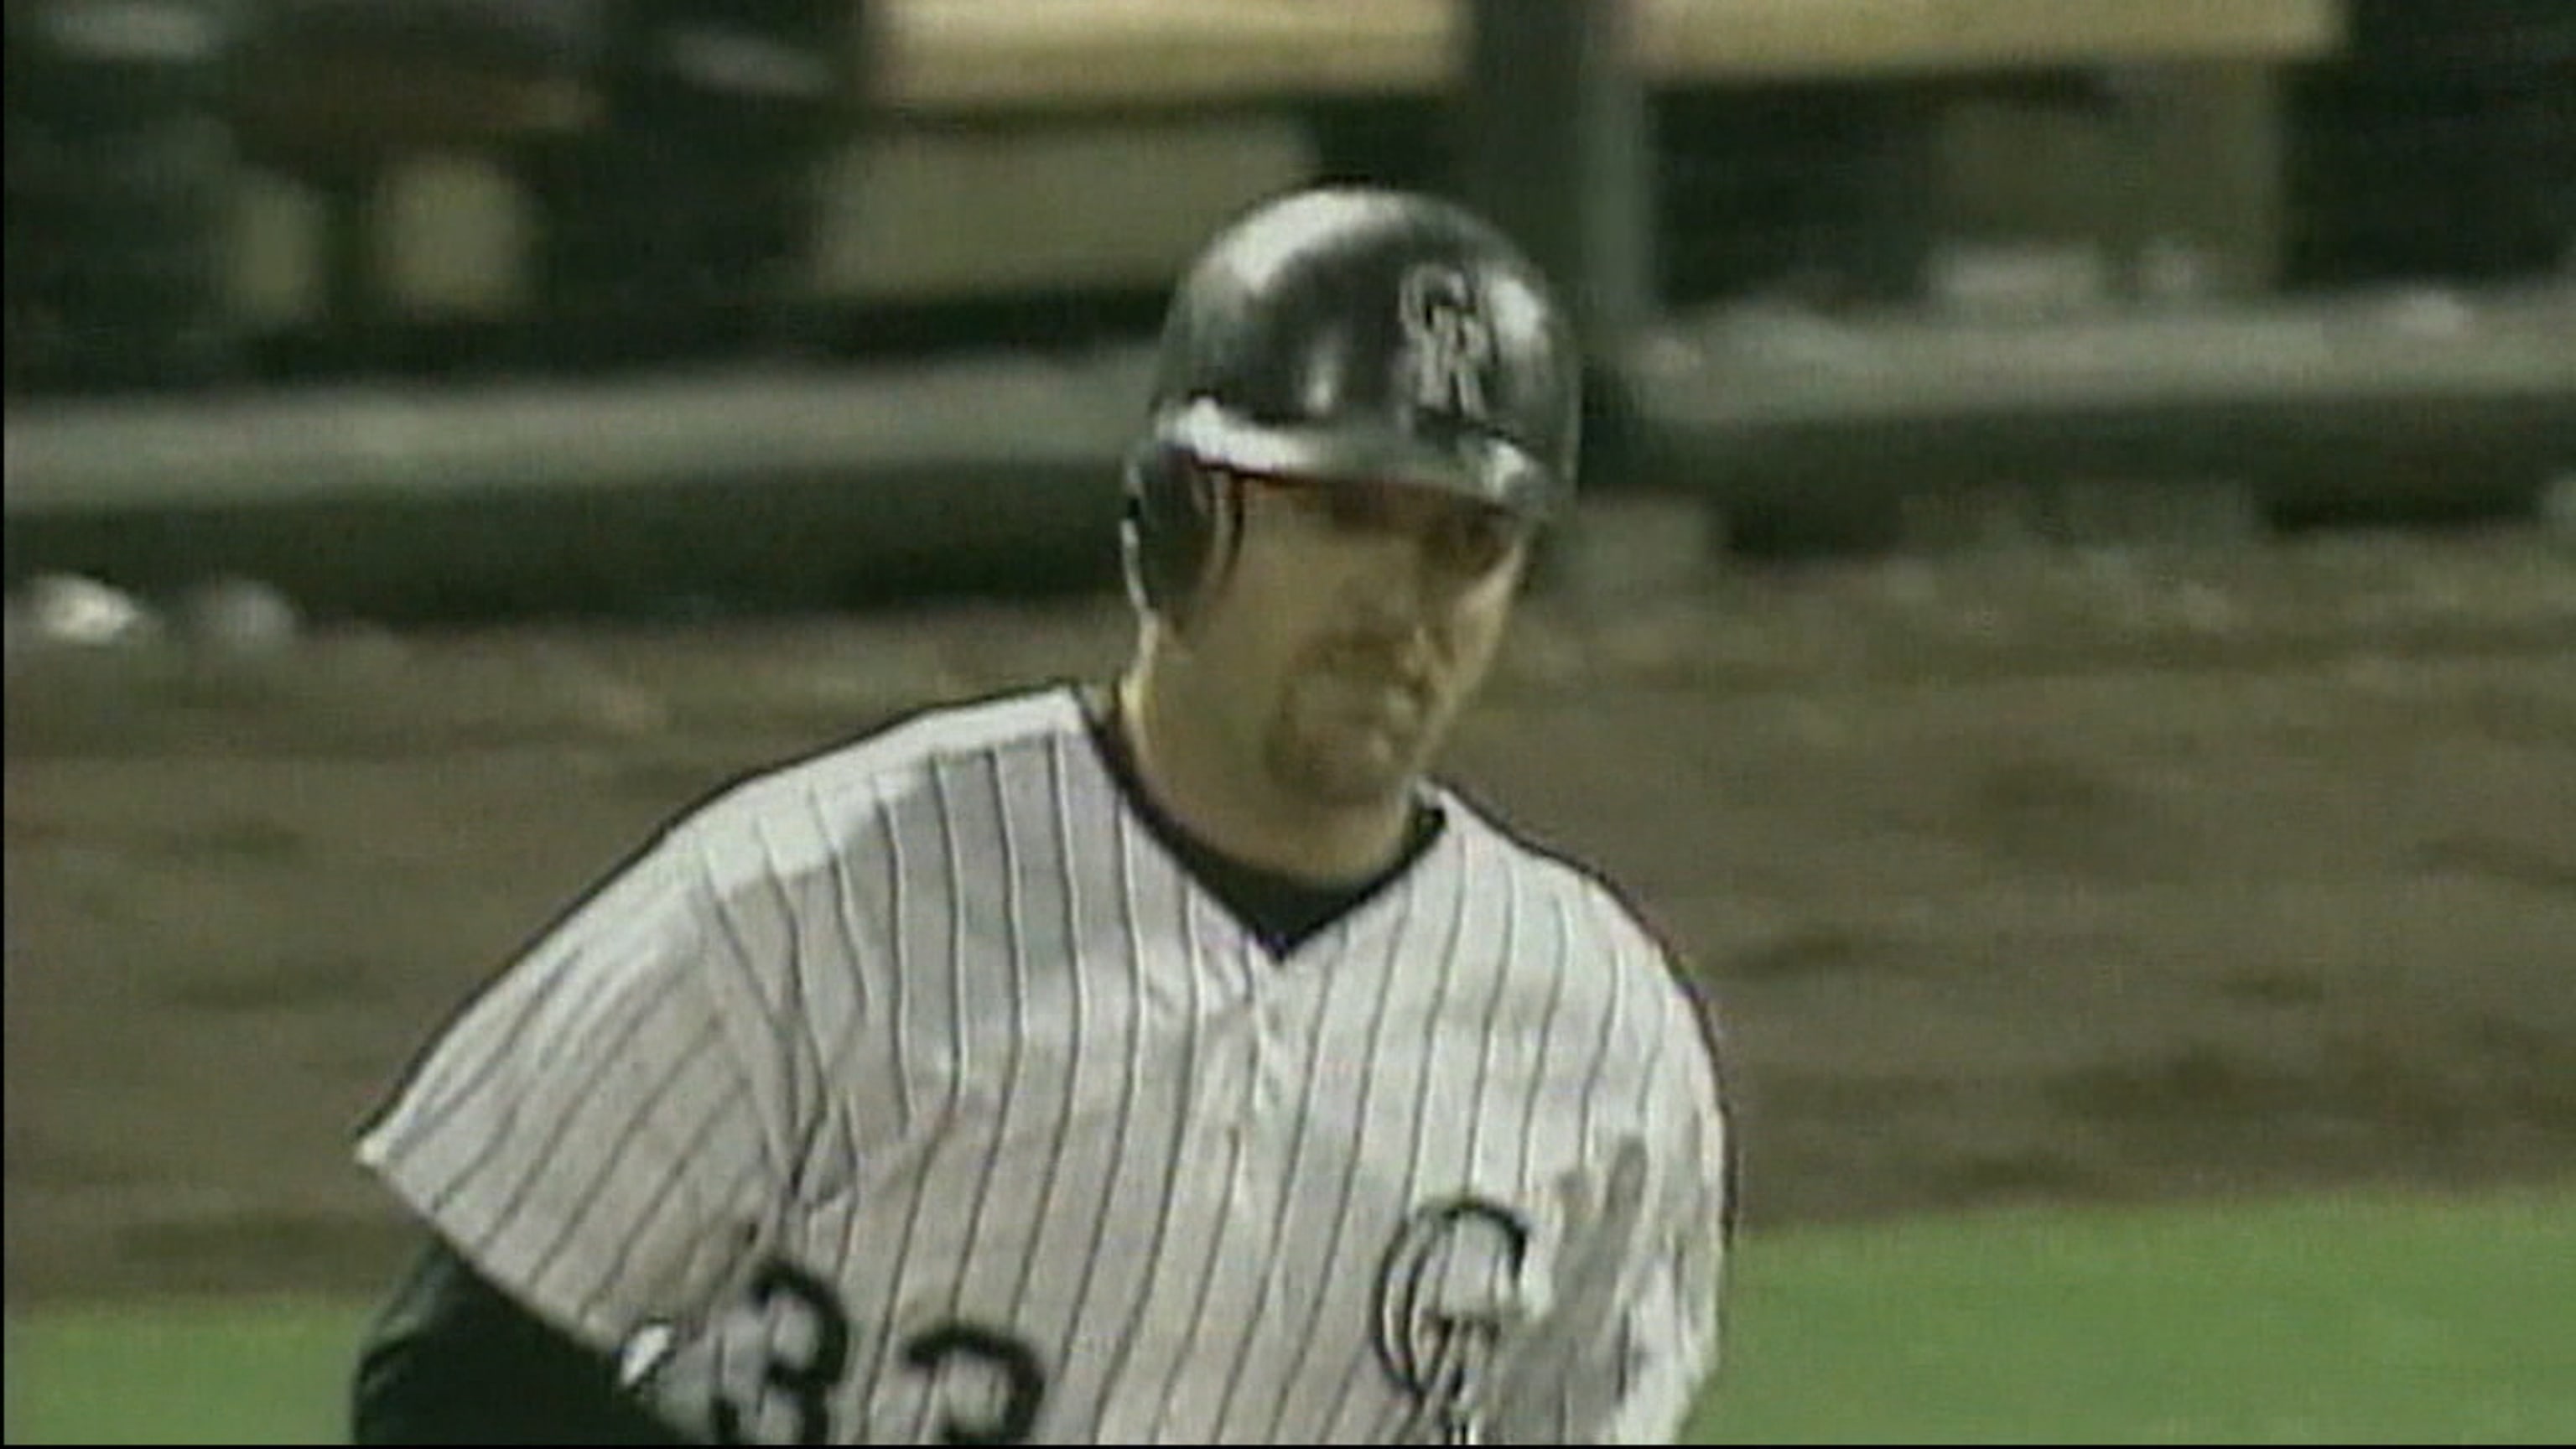 Derek Jeter and Larry Walker ran different base paths to Hall of Fame